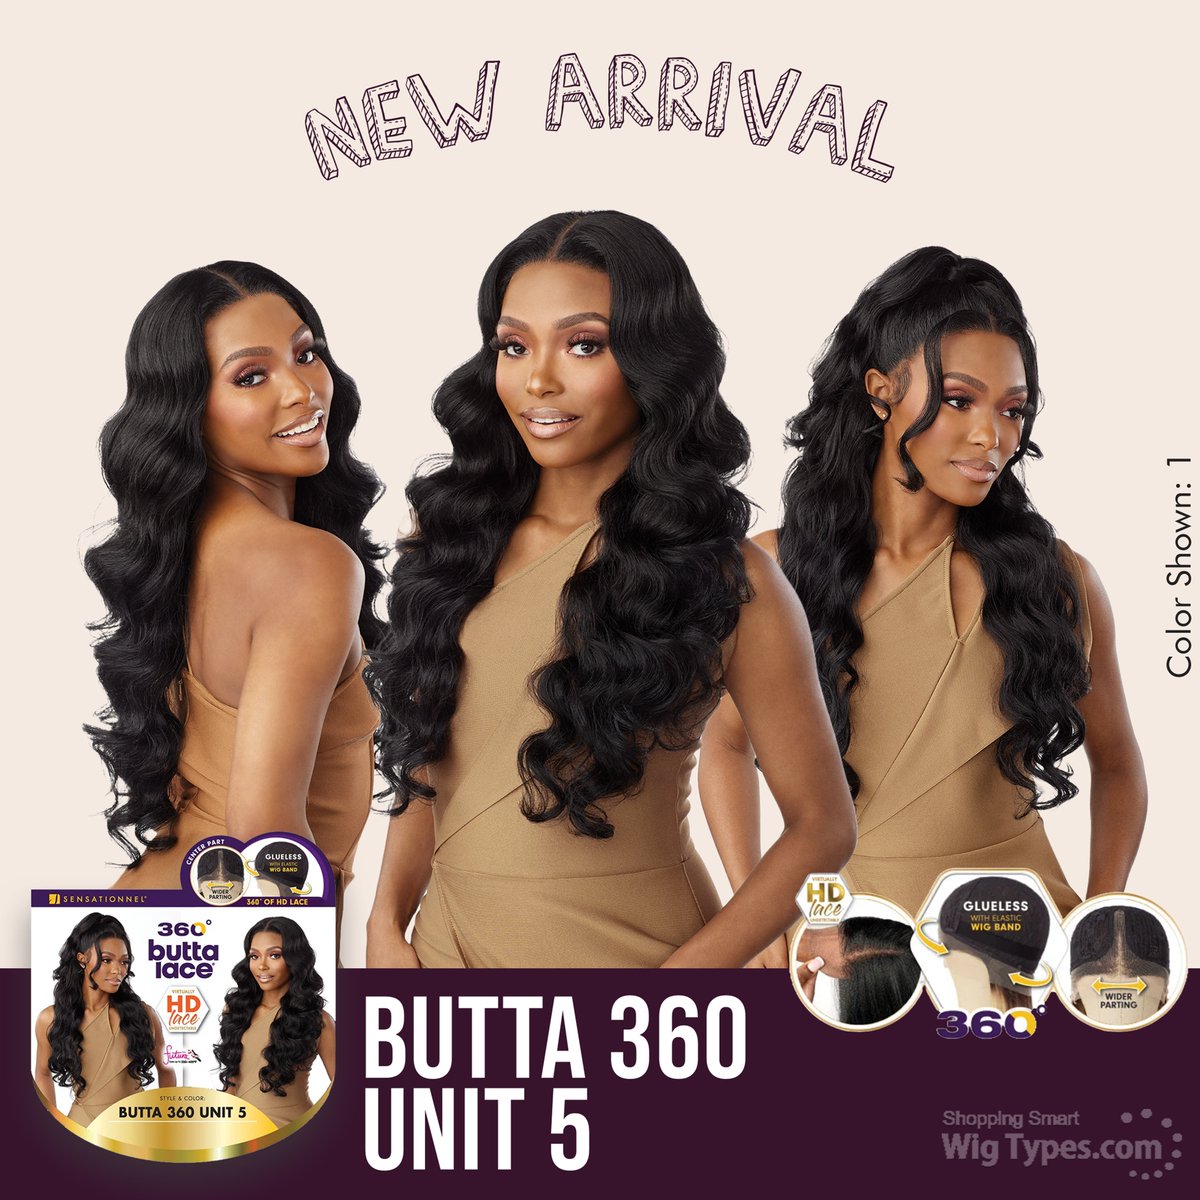 Attention 📢 Two new Sensationnel 360 Butta wigs are out now!

➡️ Sensationnel - BUTTA 360 UNIT 4
Color Shown: 2

➡️ Sensationnel - BUTTA 360 UNIT 5
Color Shown: 1

🛍️ @ wigtypes.com
.
.
#wigtypes #wigtypesdotcom #wigs #sensationnel #syntheticwigs #360wig #gluelesswig